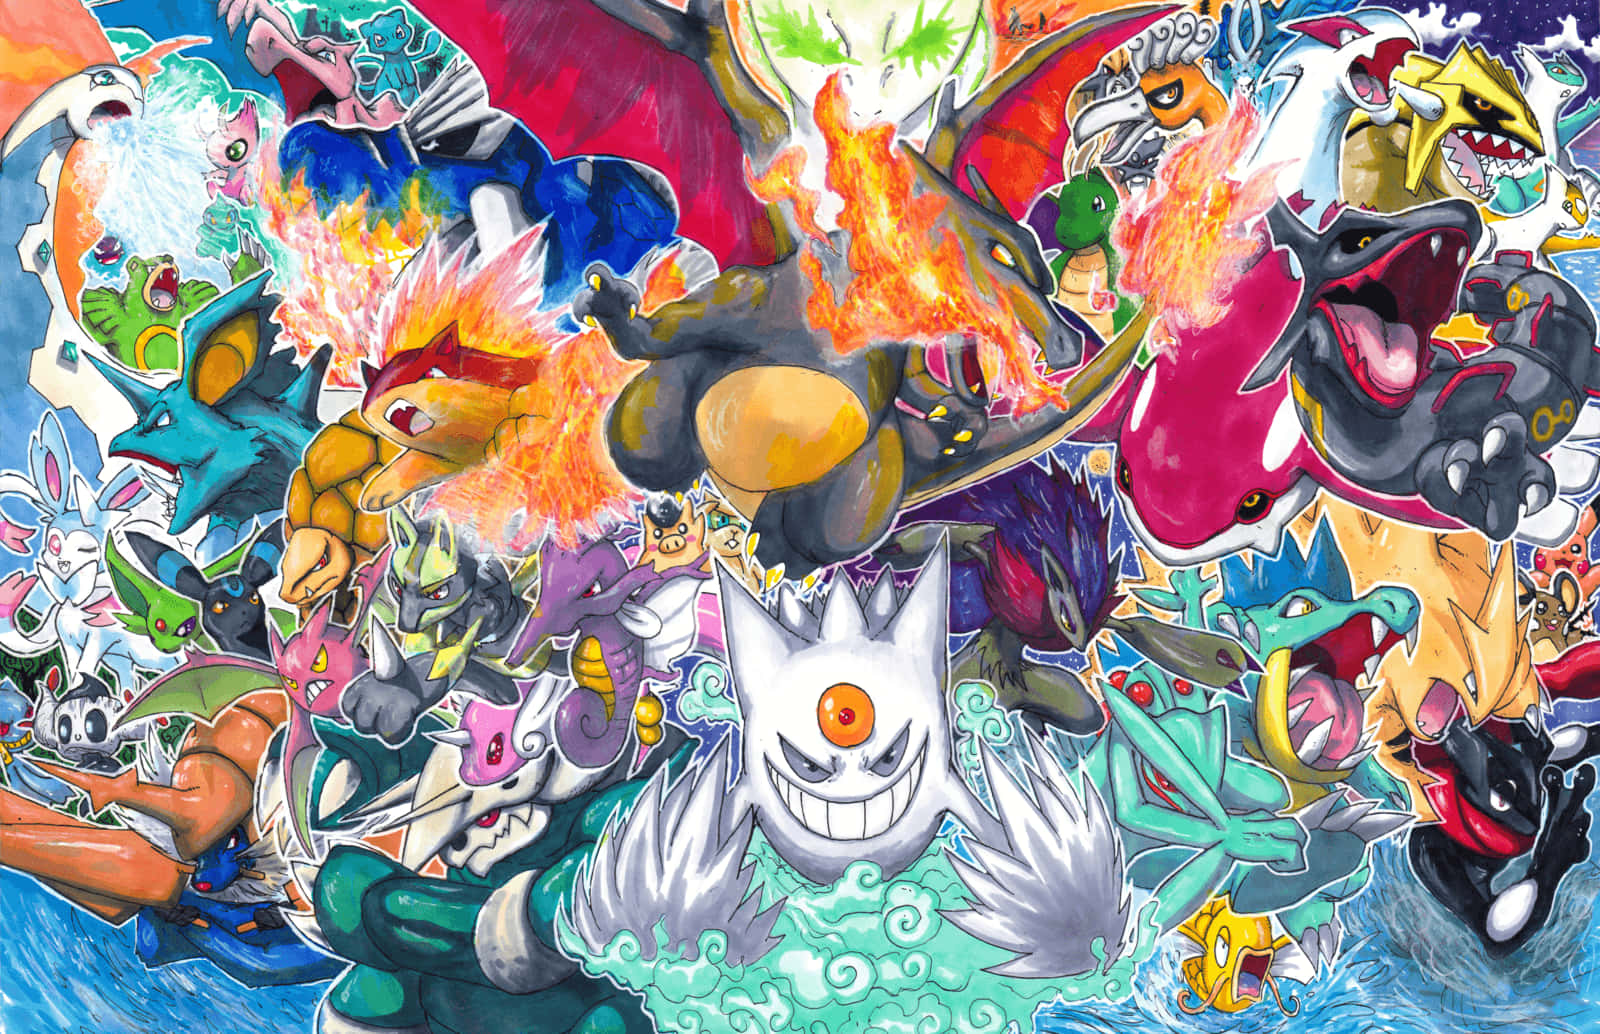 "Collect them all - Every Legendary Pokemon!" Wallpaper